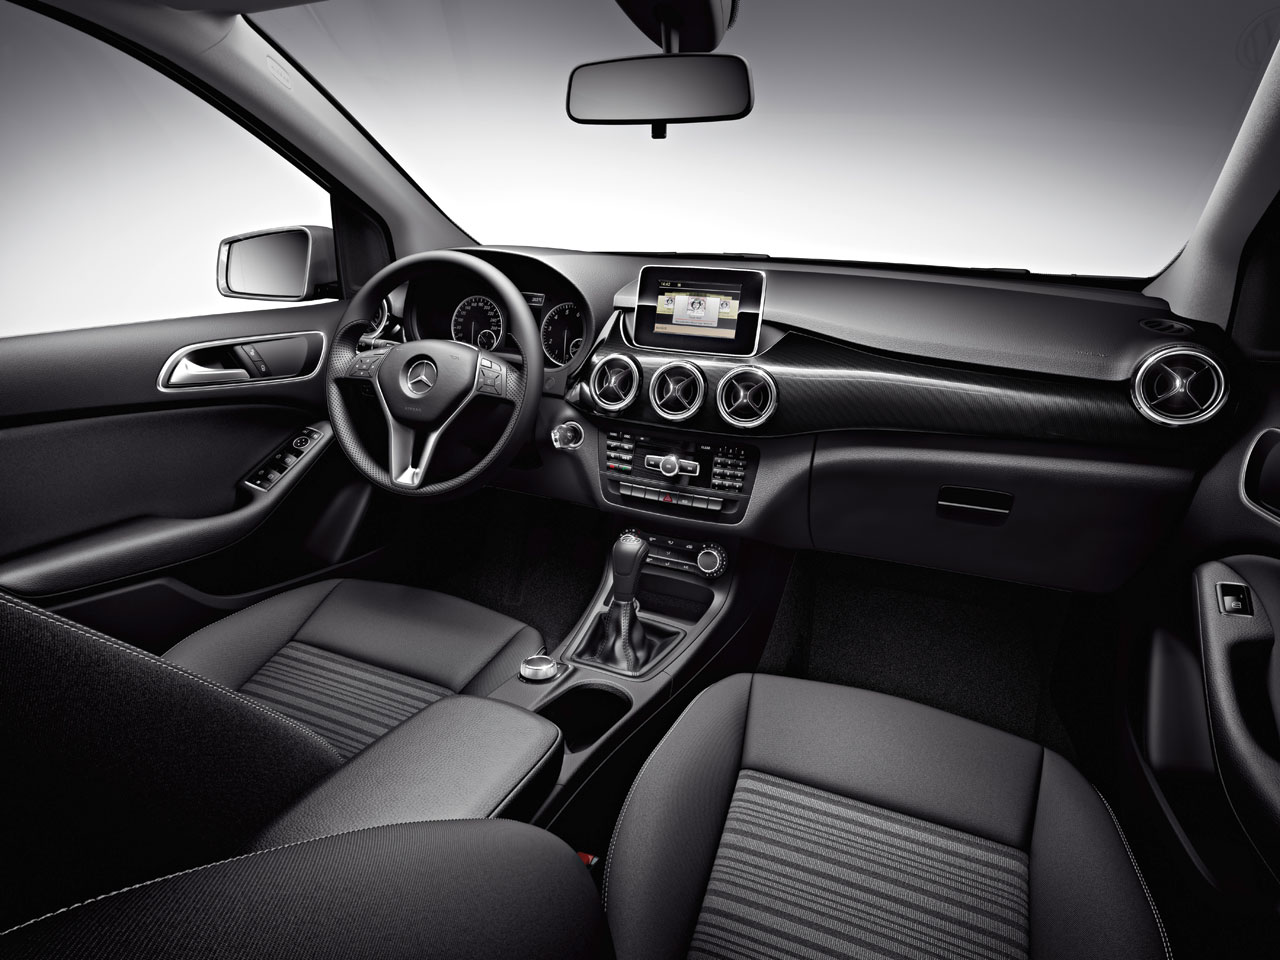 Mercedes-Benz B-Class - Cabin and Practicality